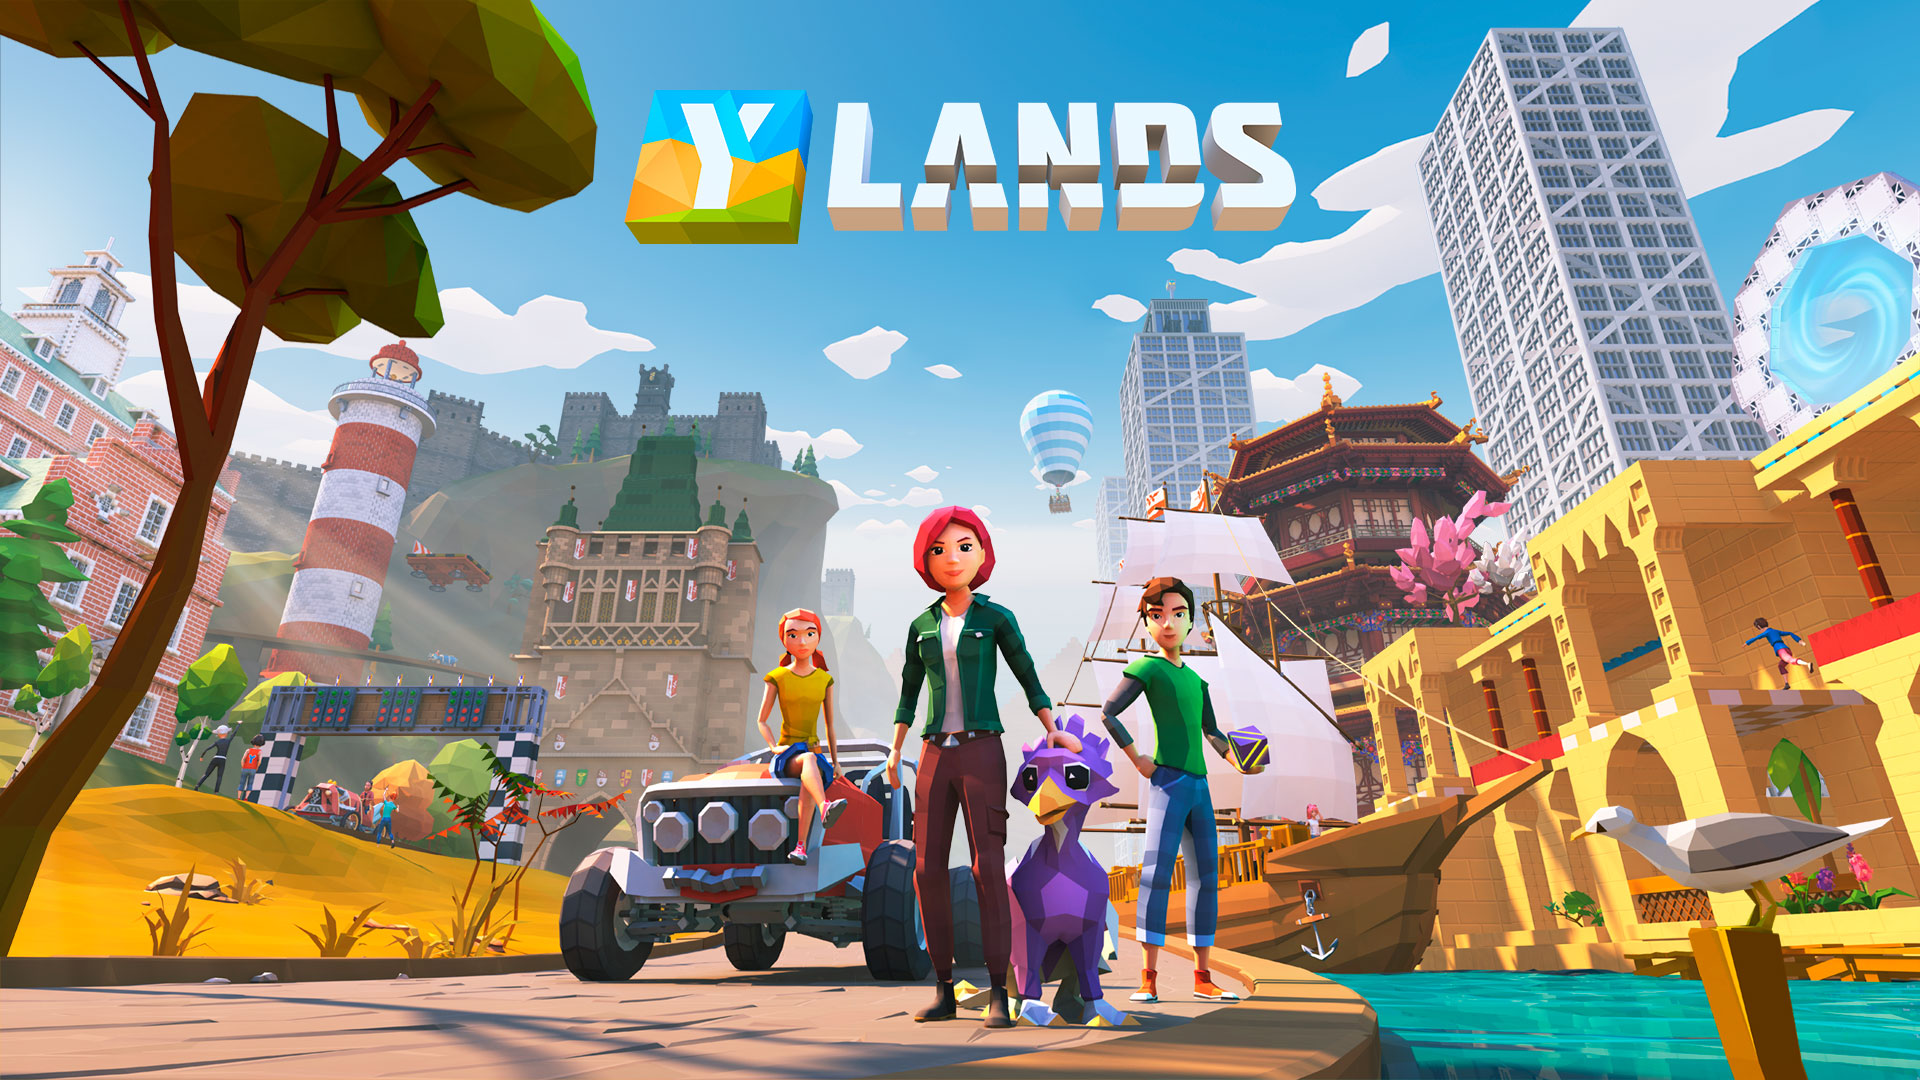 for iphone download Ylands free